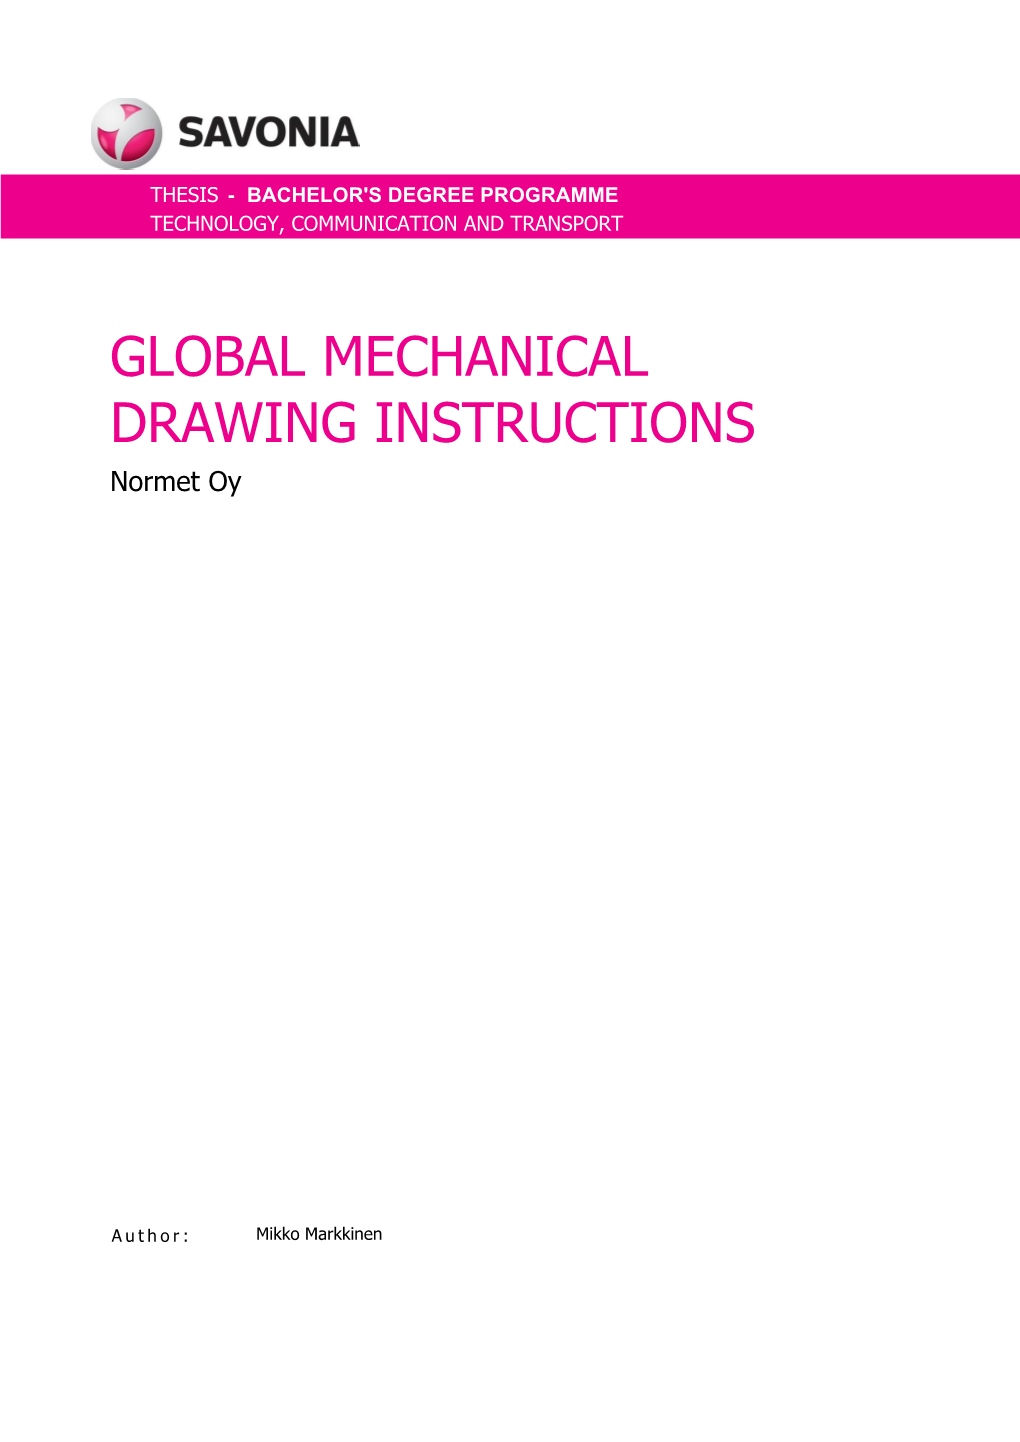 GLOBAL MECHANICAL DRAWING INSTRUCTIONS Normet Oy